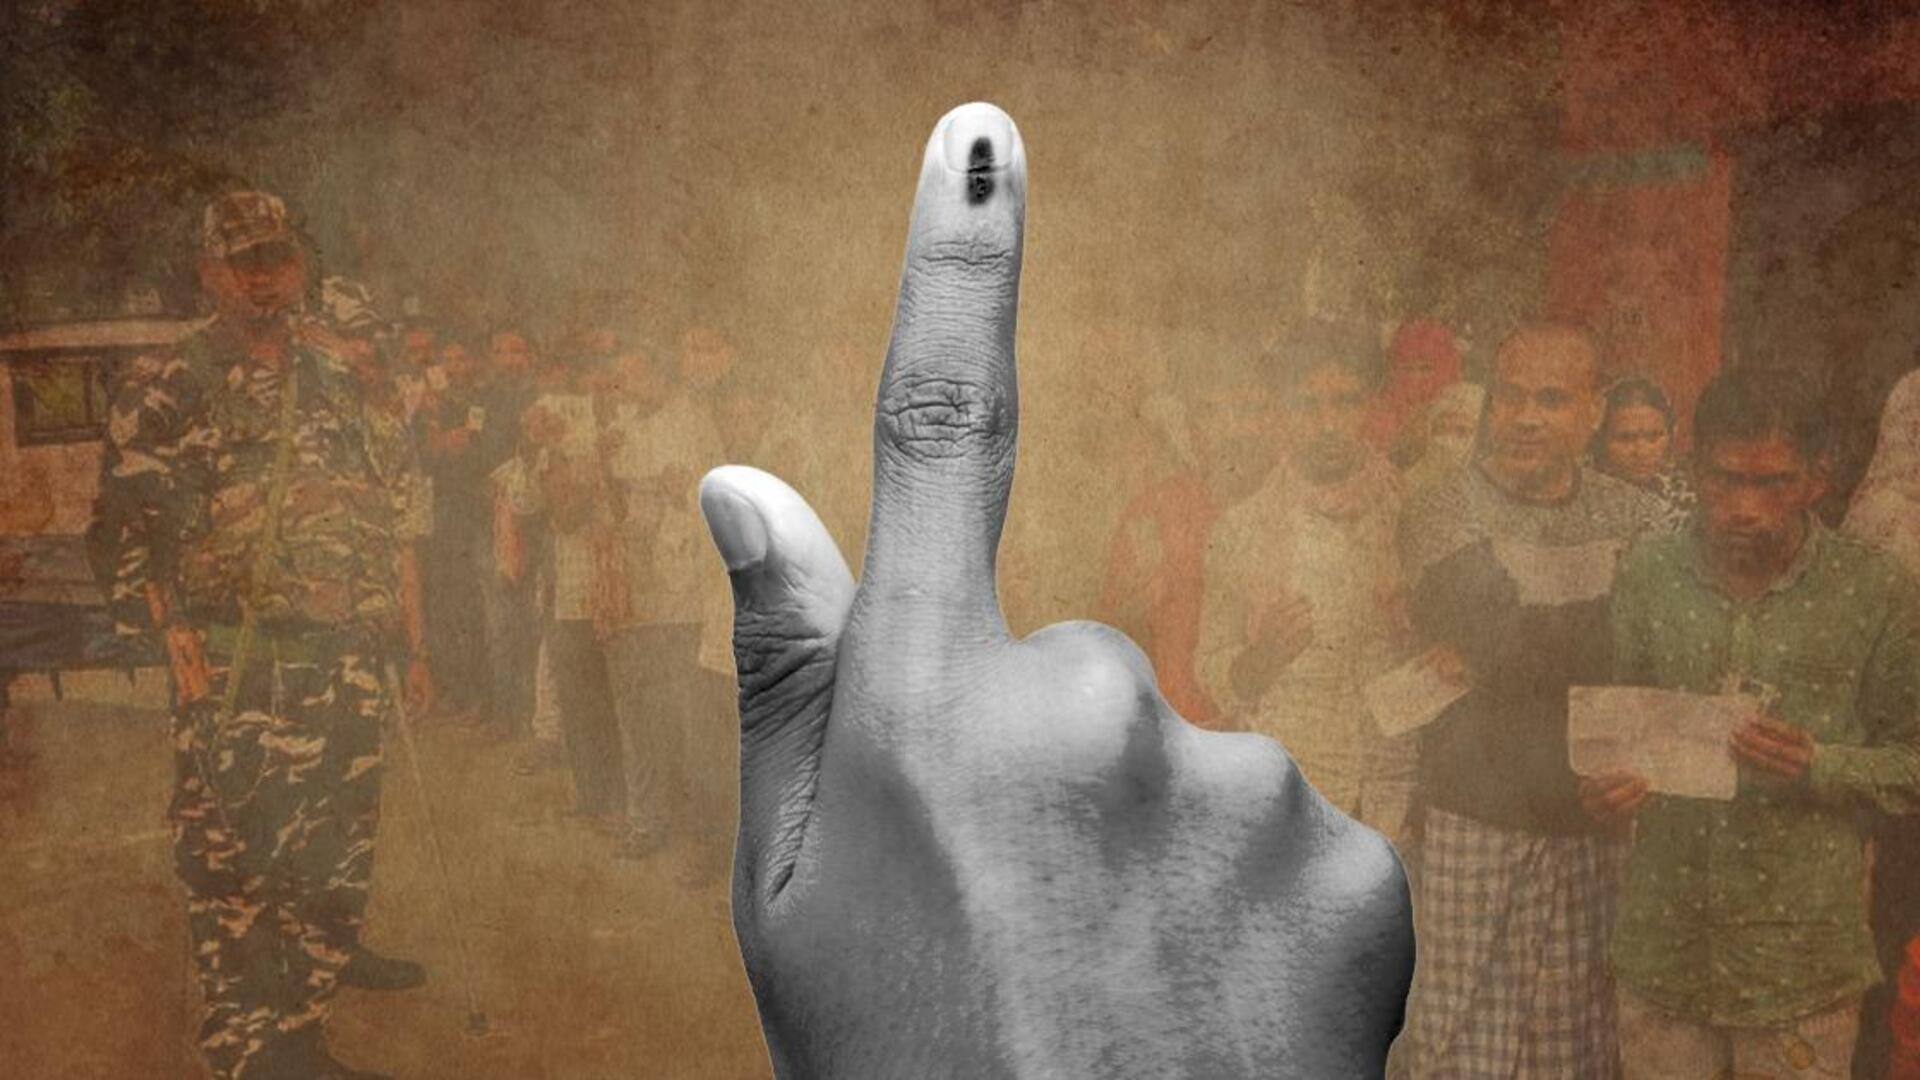 Assembly bypoll results: INDIA vs NDA as counting underway